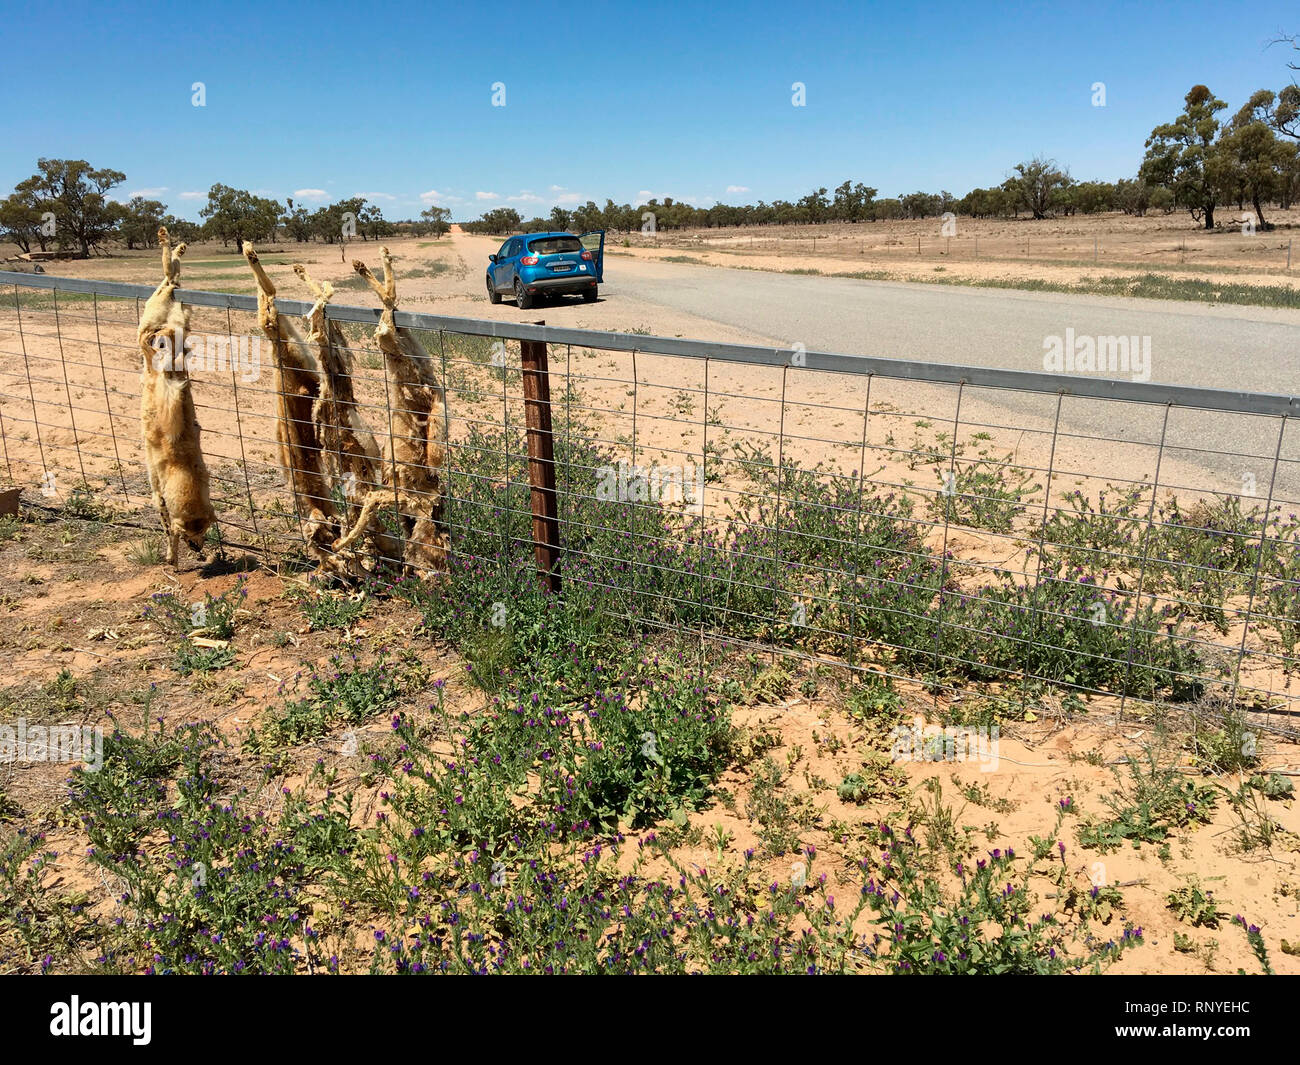 Dingoes strung up on a fence near Cobar, NSW, Australia Stock Photo